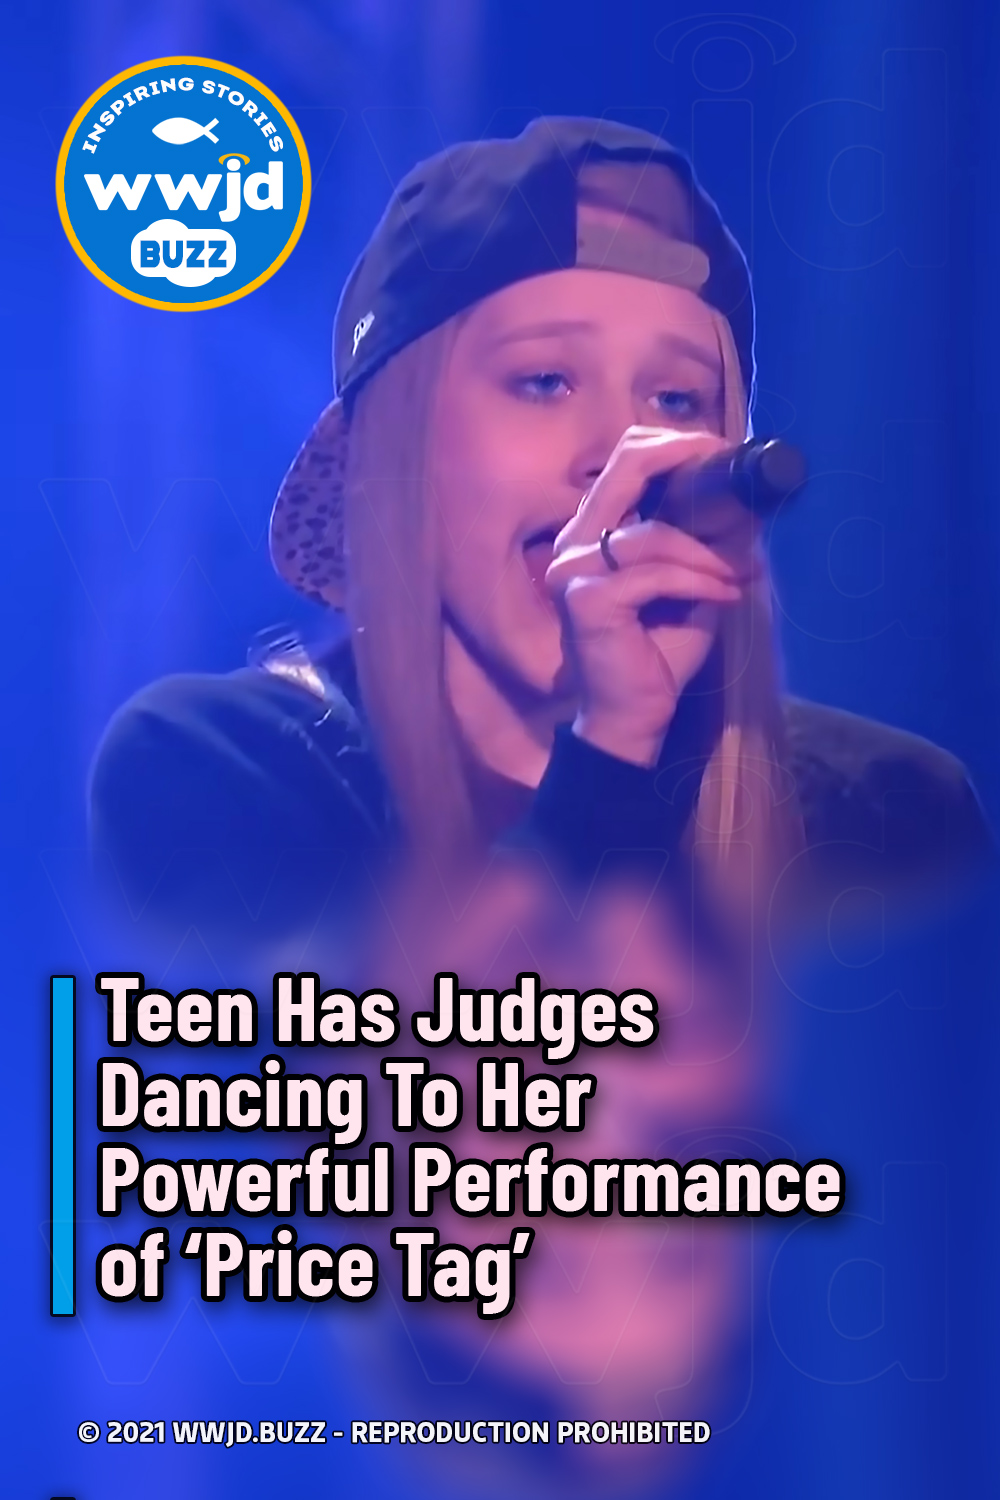 Teen Has Judges Dancing To Her Powerful Performance of ‘Price Tag’